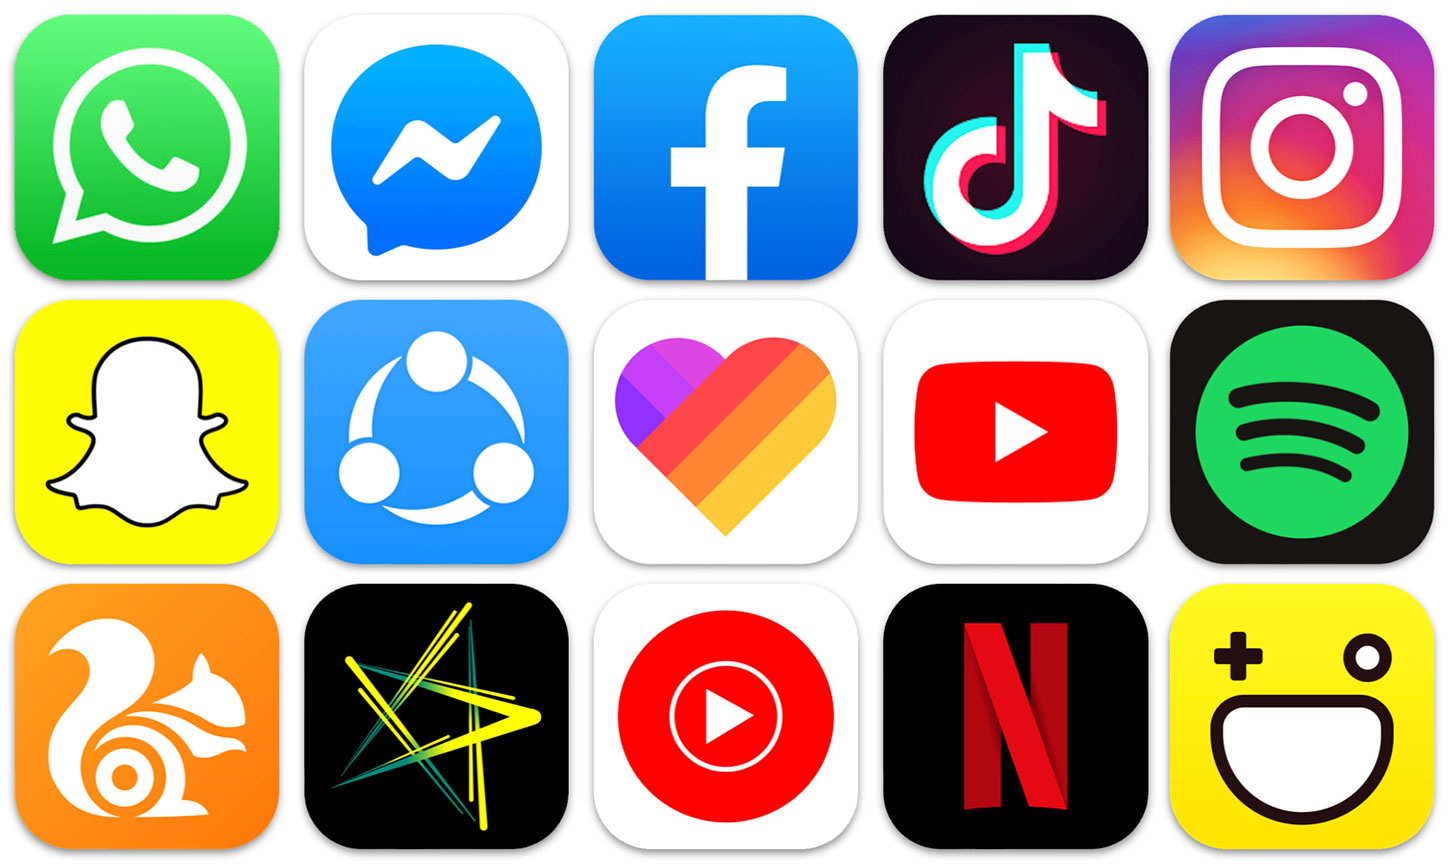 Top Apps Worldwide for Q2 2019 Banner Image